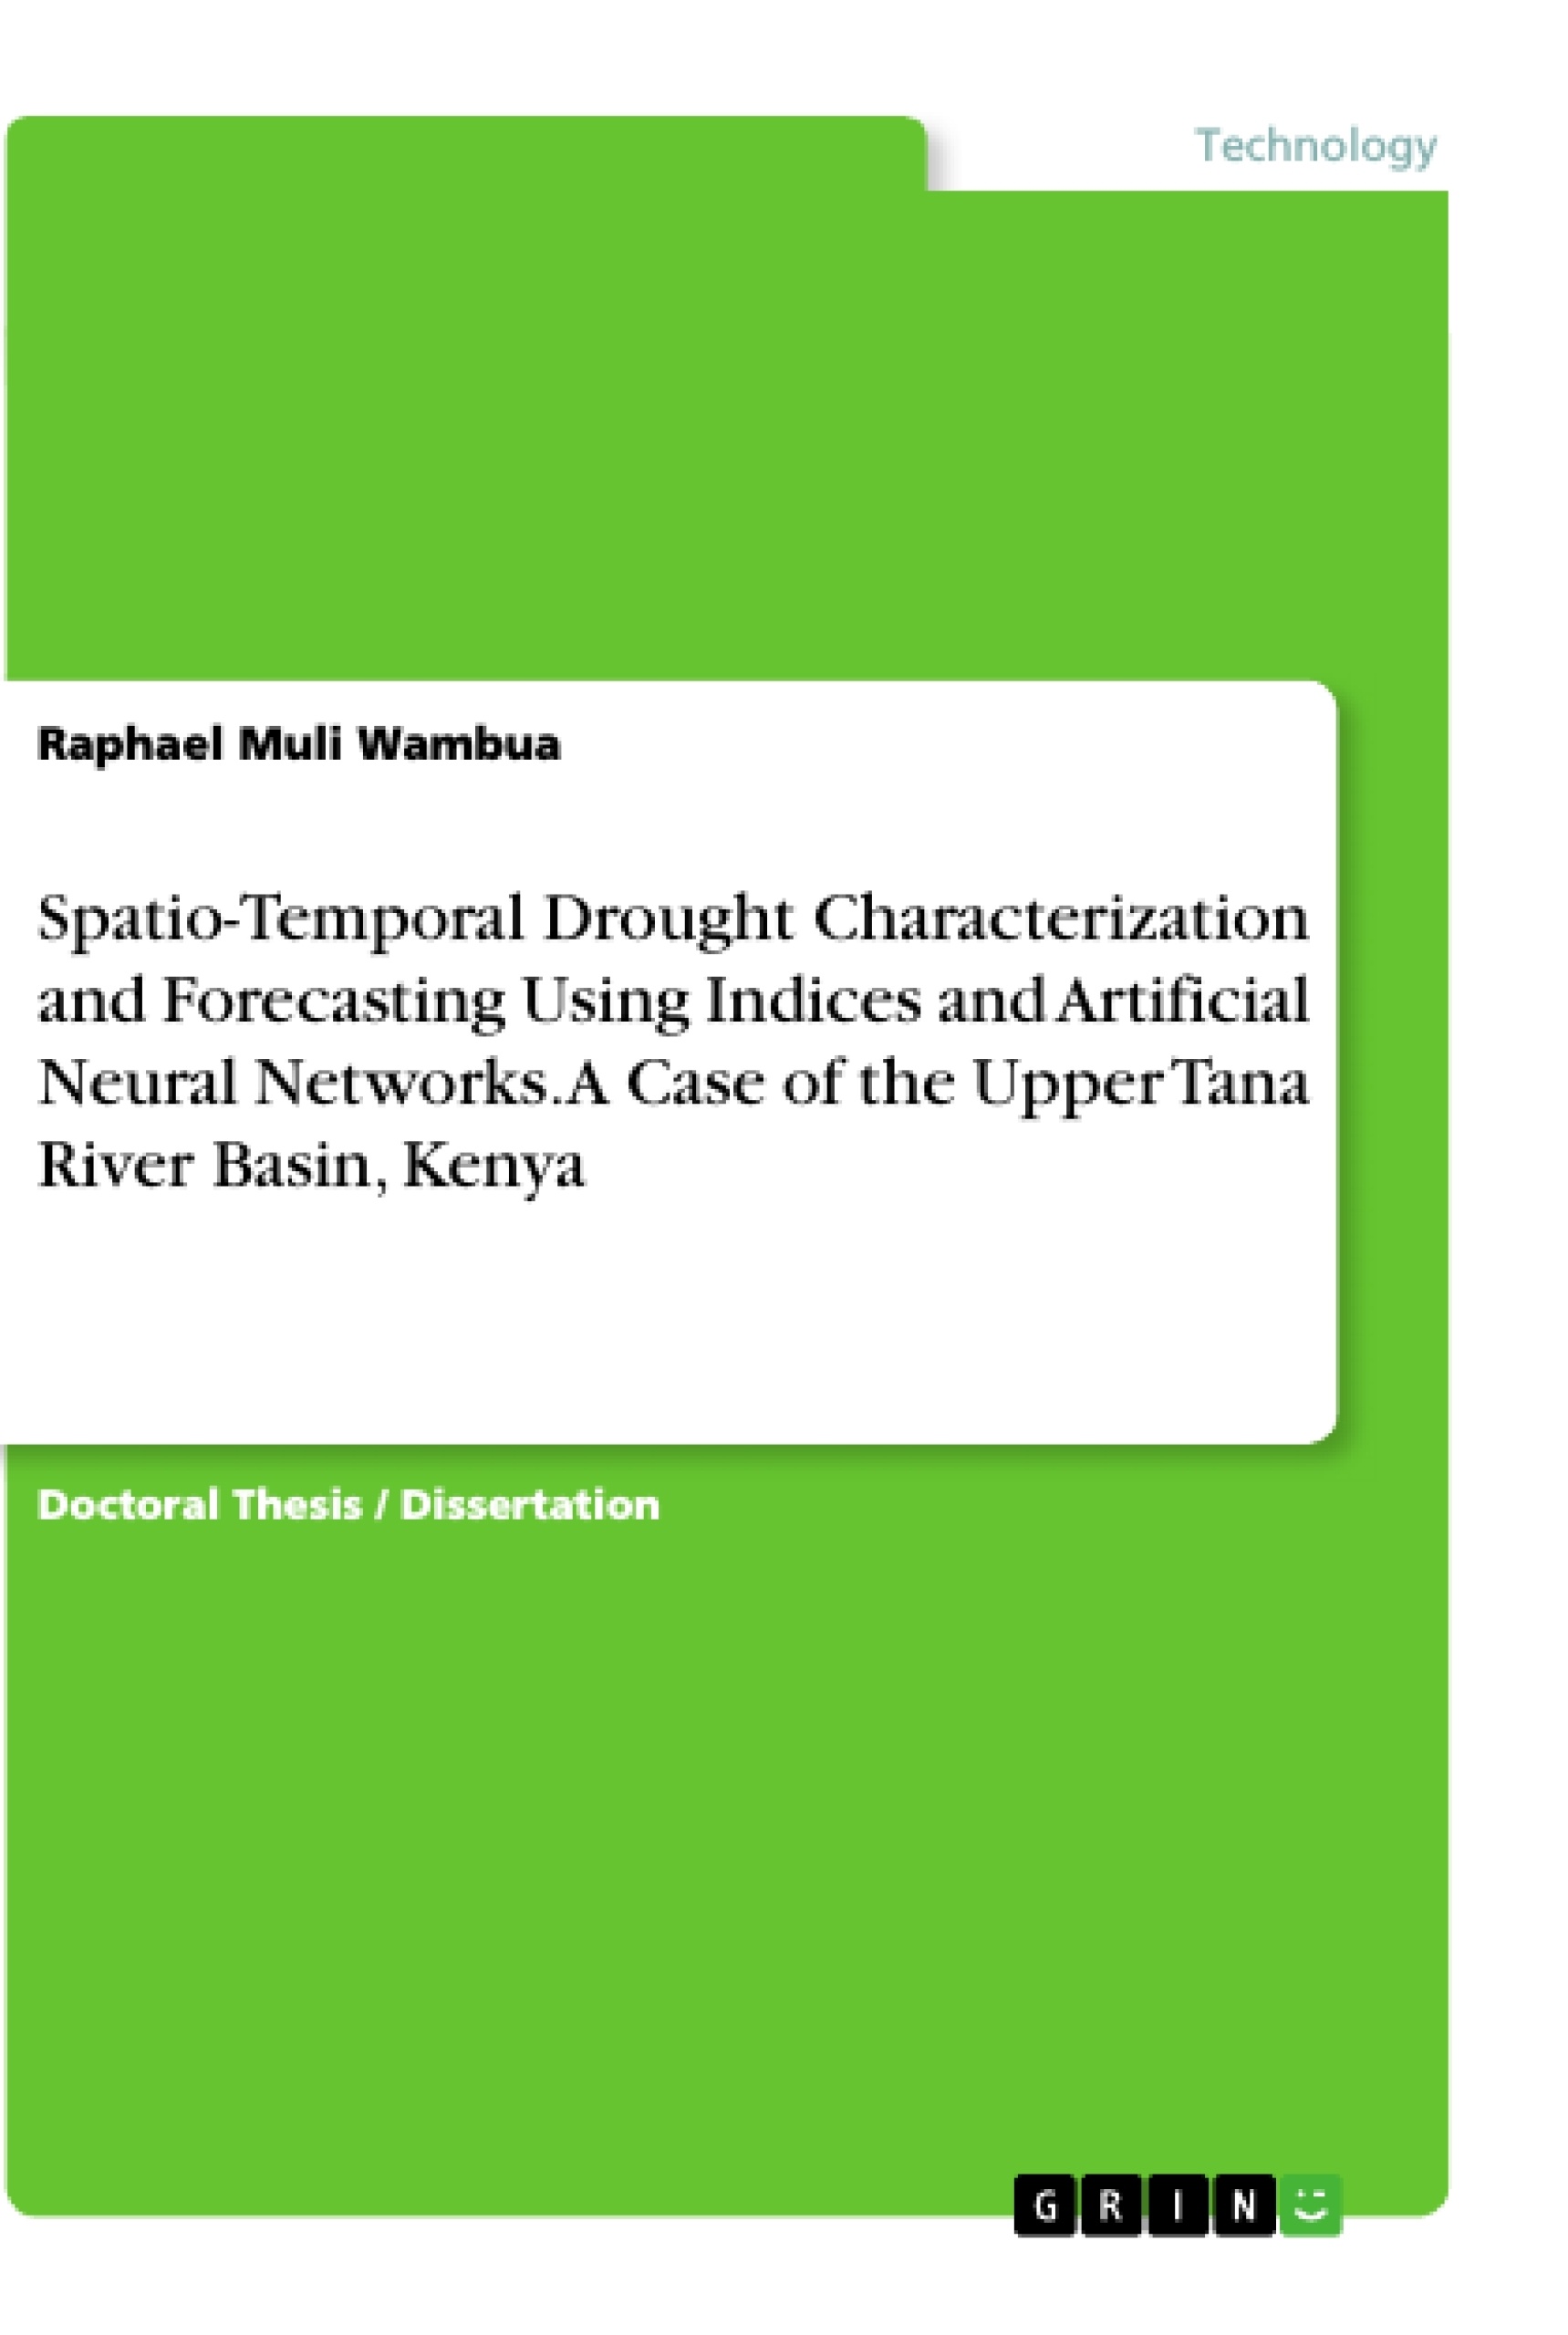 Titre: Spatio-Temporal Drought Characterization and Forecasting Using Indices and Artificial Neural Networks. A Case of the Upper Tana River Basin, Kenya